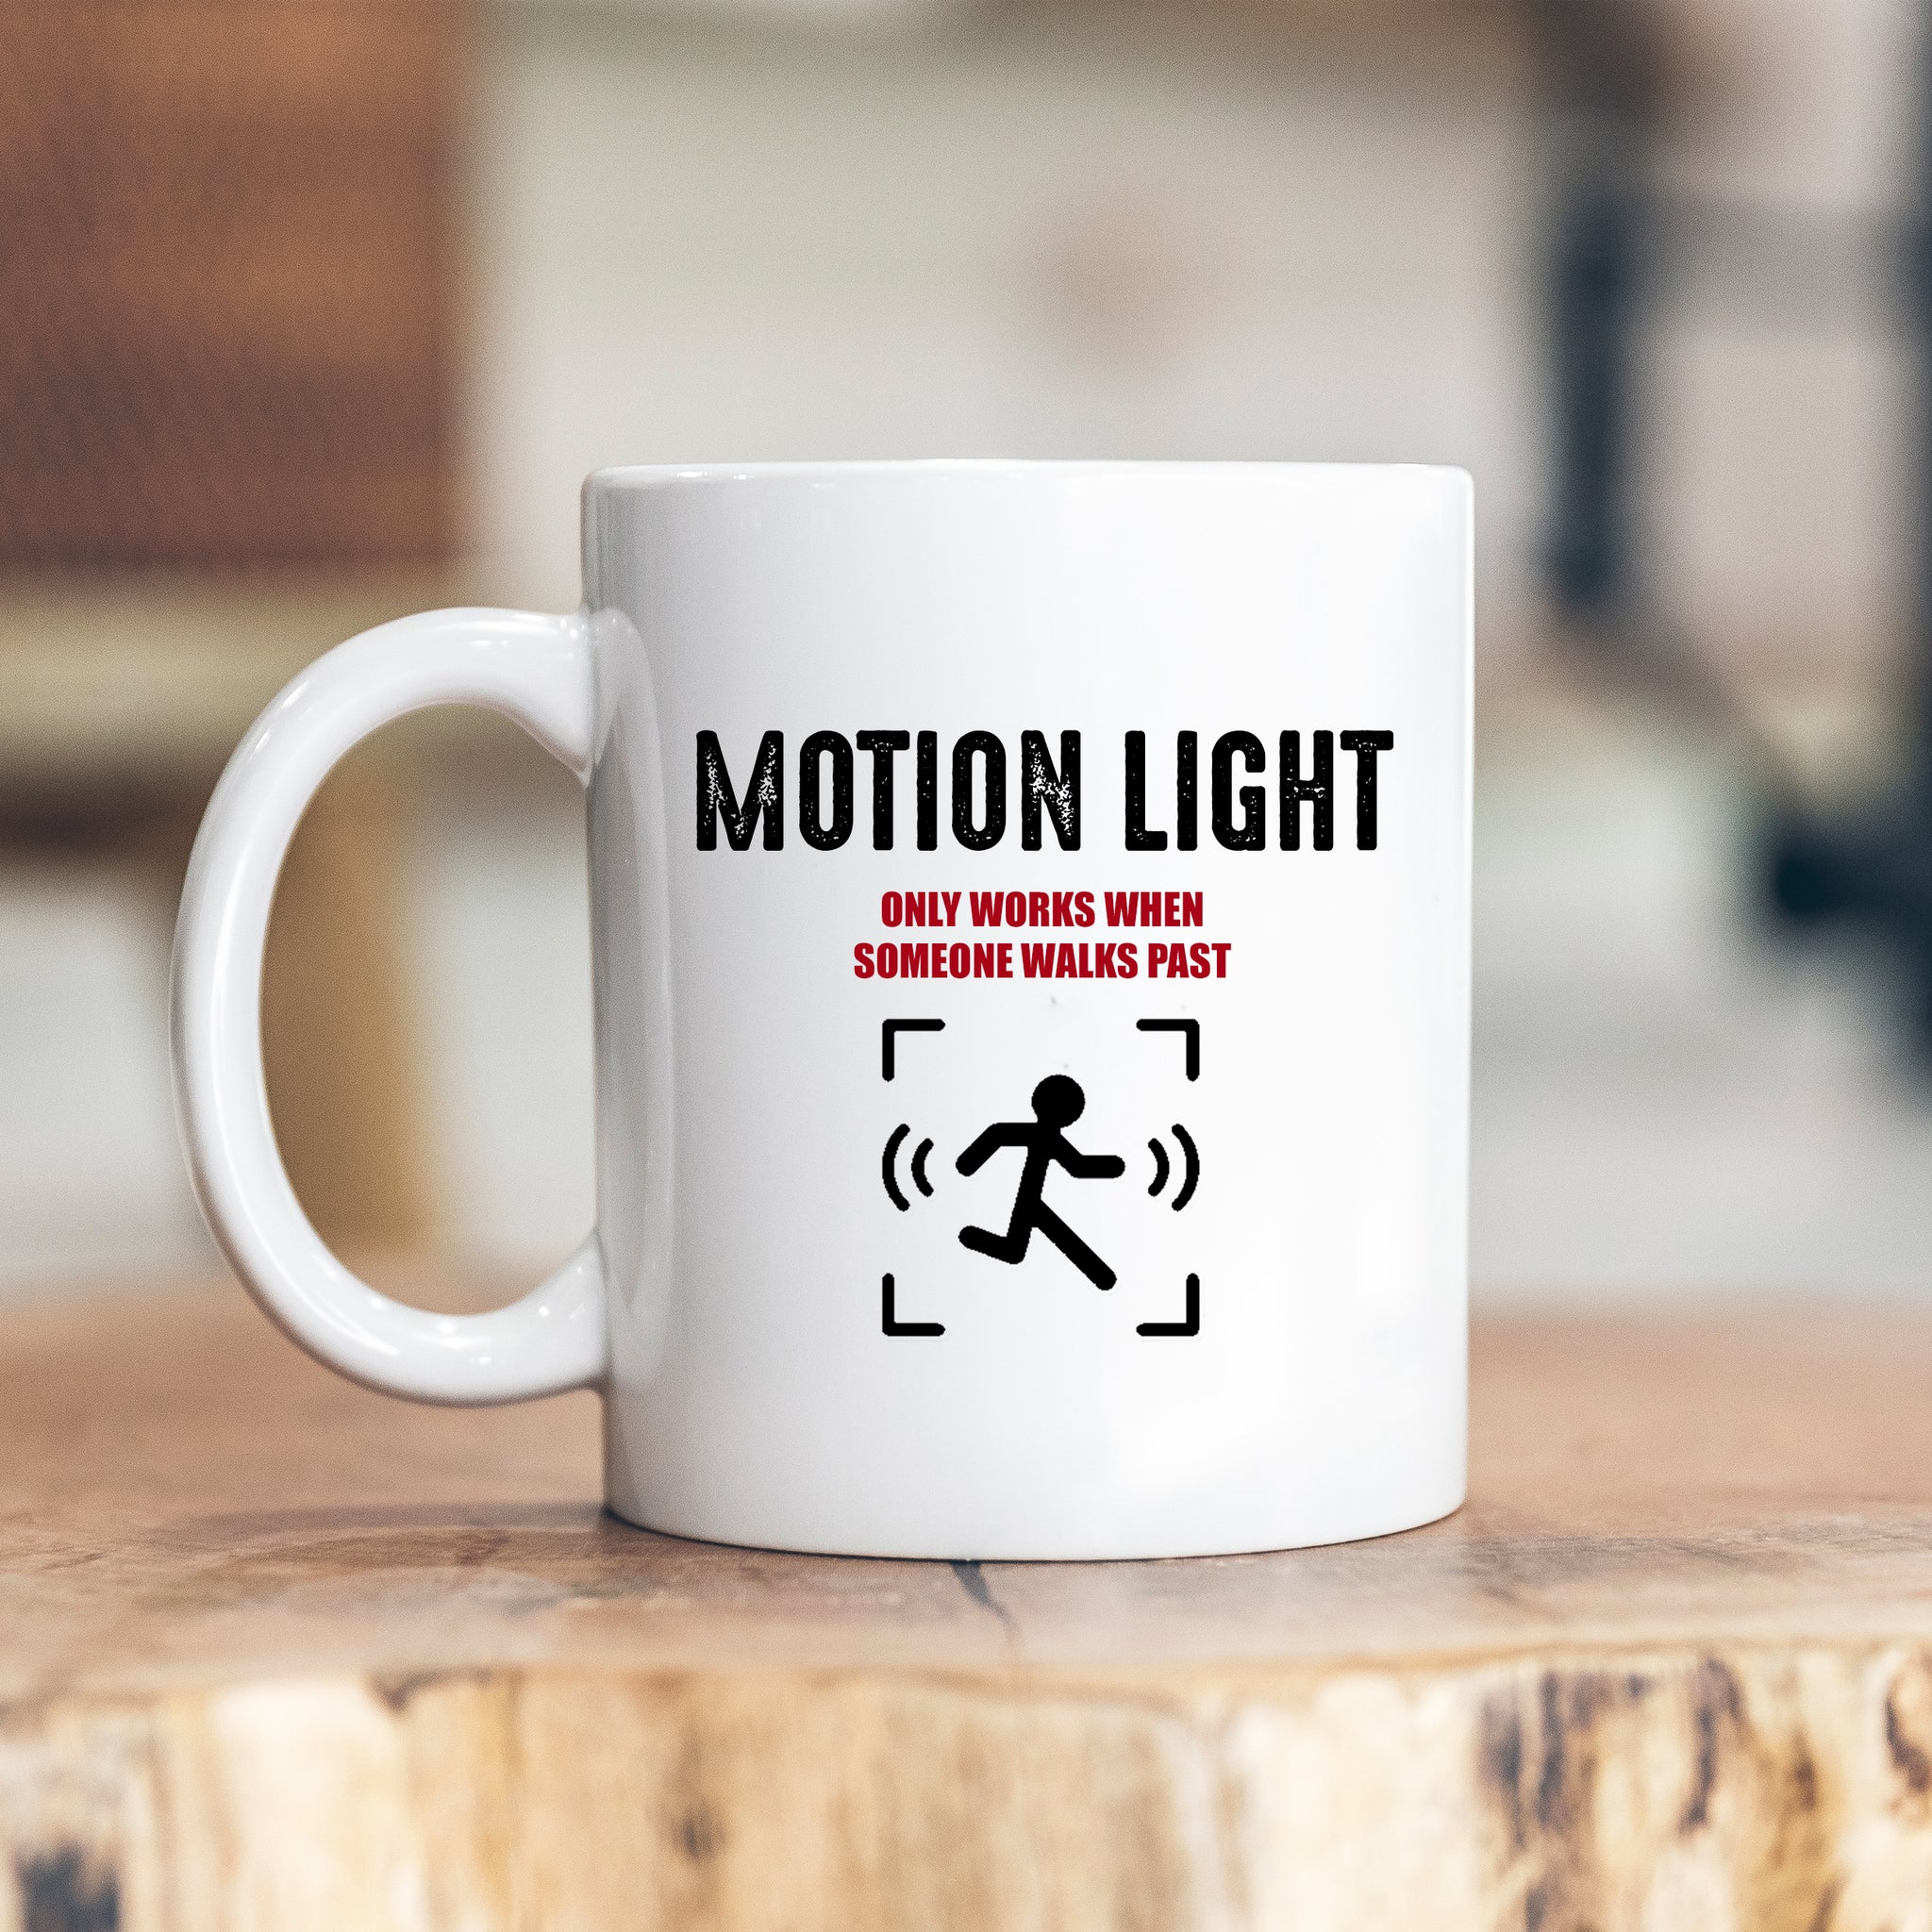 Motion Light Only Works When Someone Walks Past, Funny Offensive Birthday Gift for Tradesman or Office Colleague, Personalised Mug